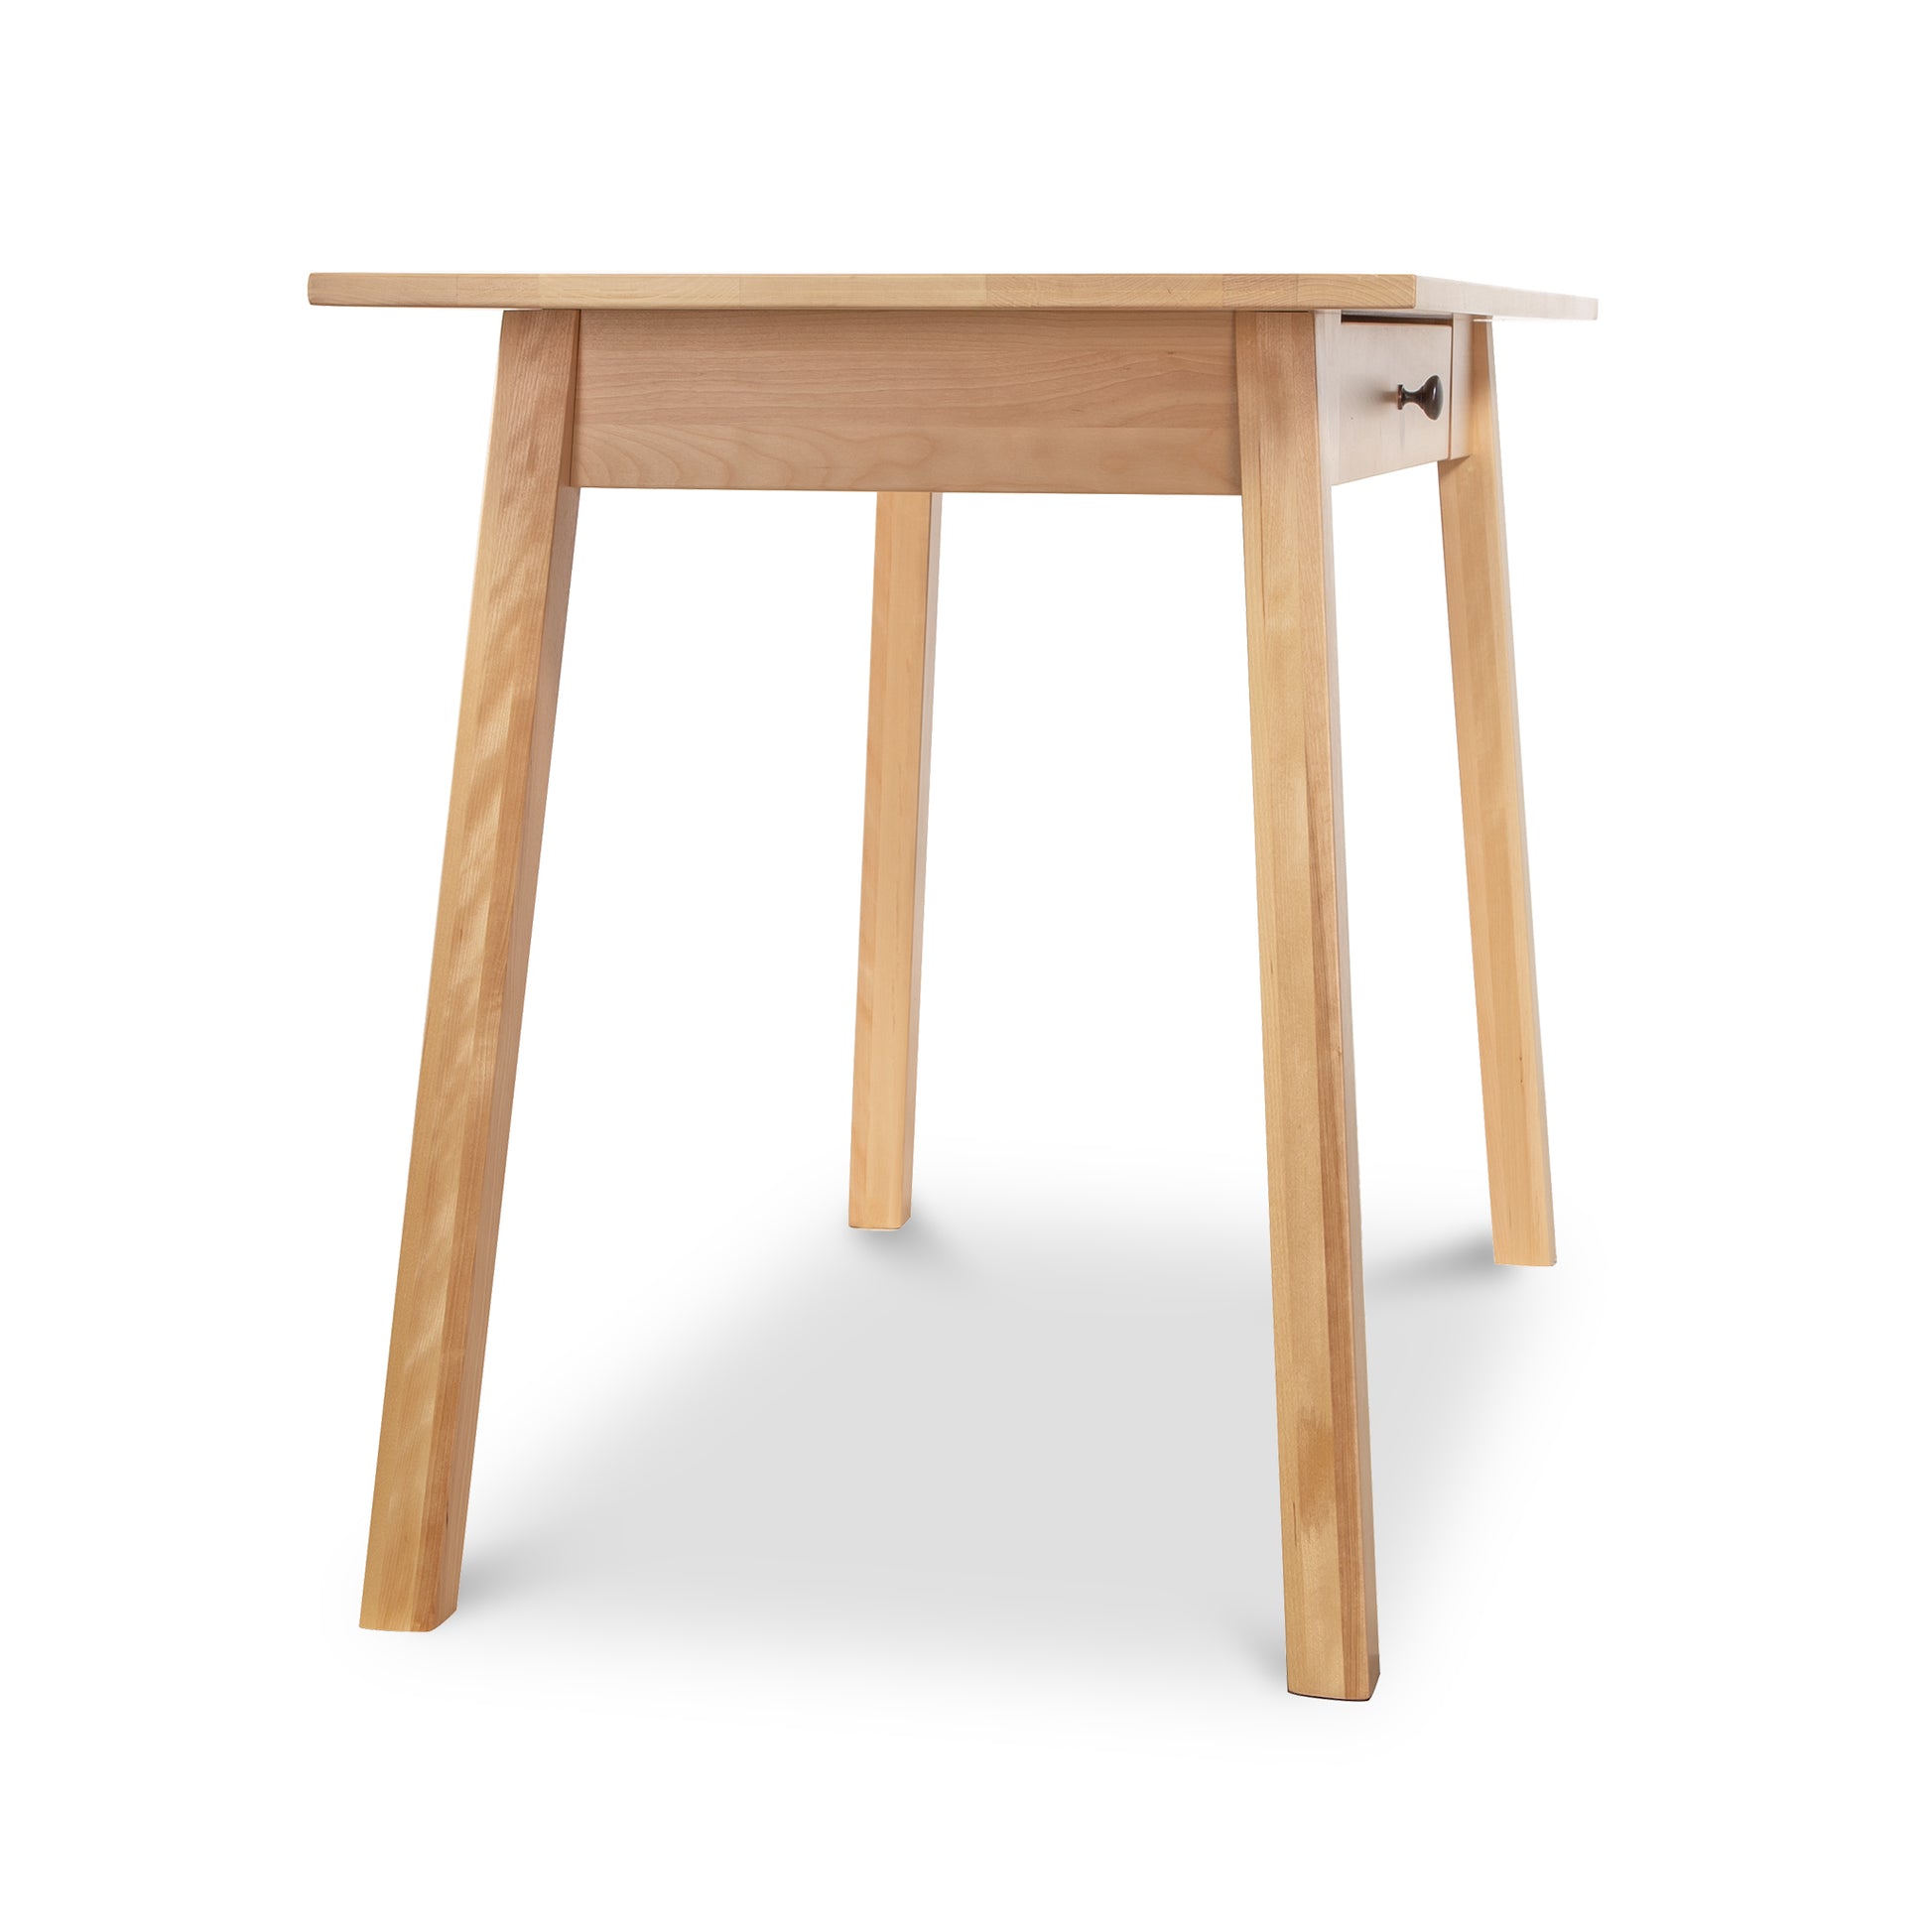 A wooden table with two legs and a drawer.